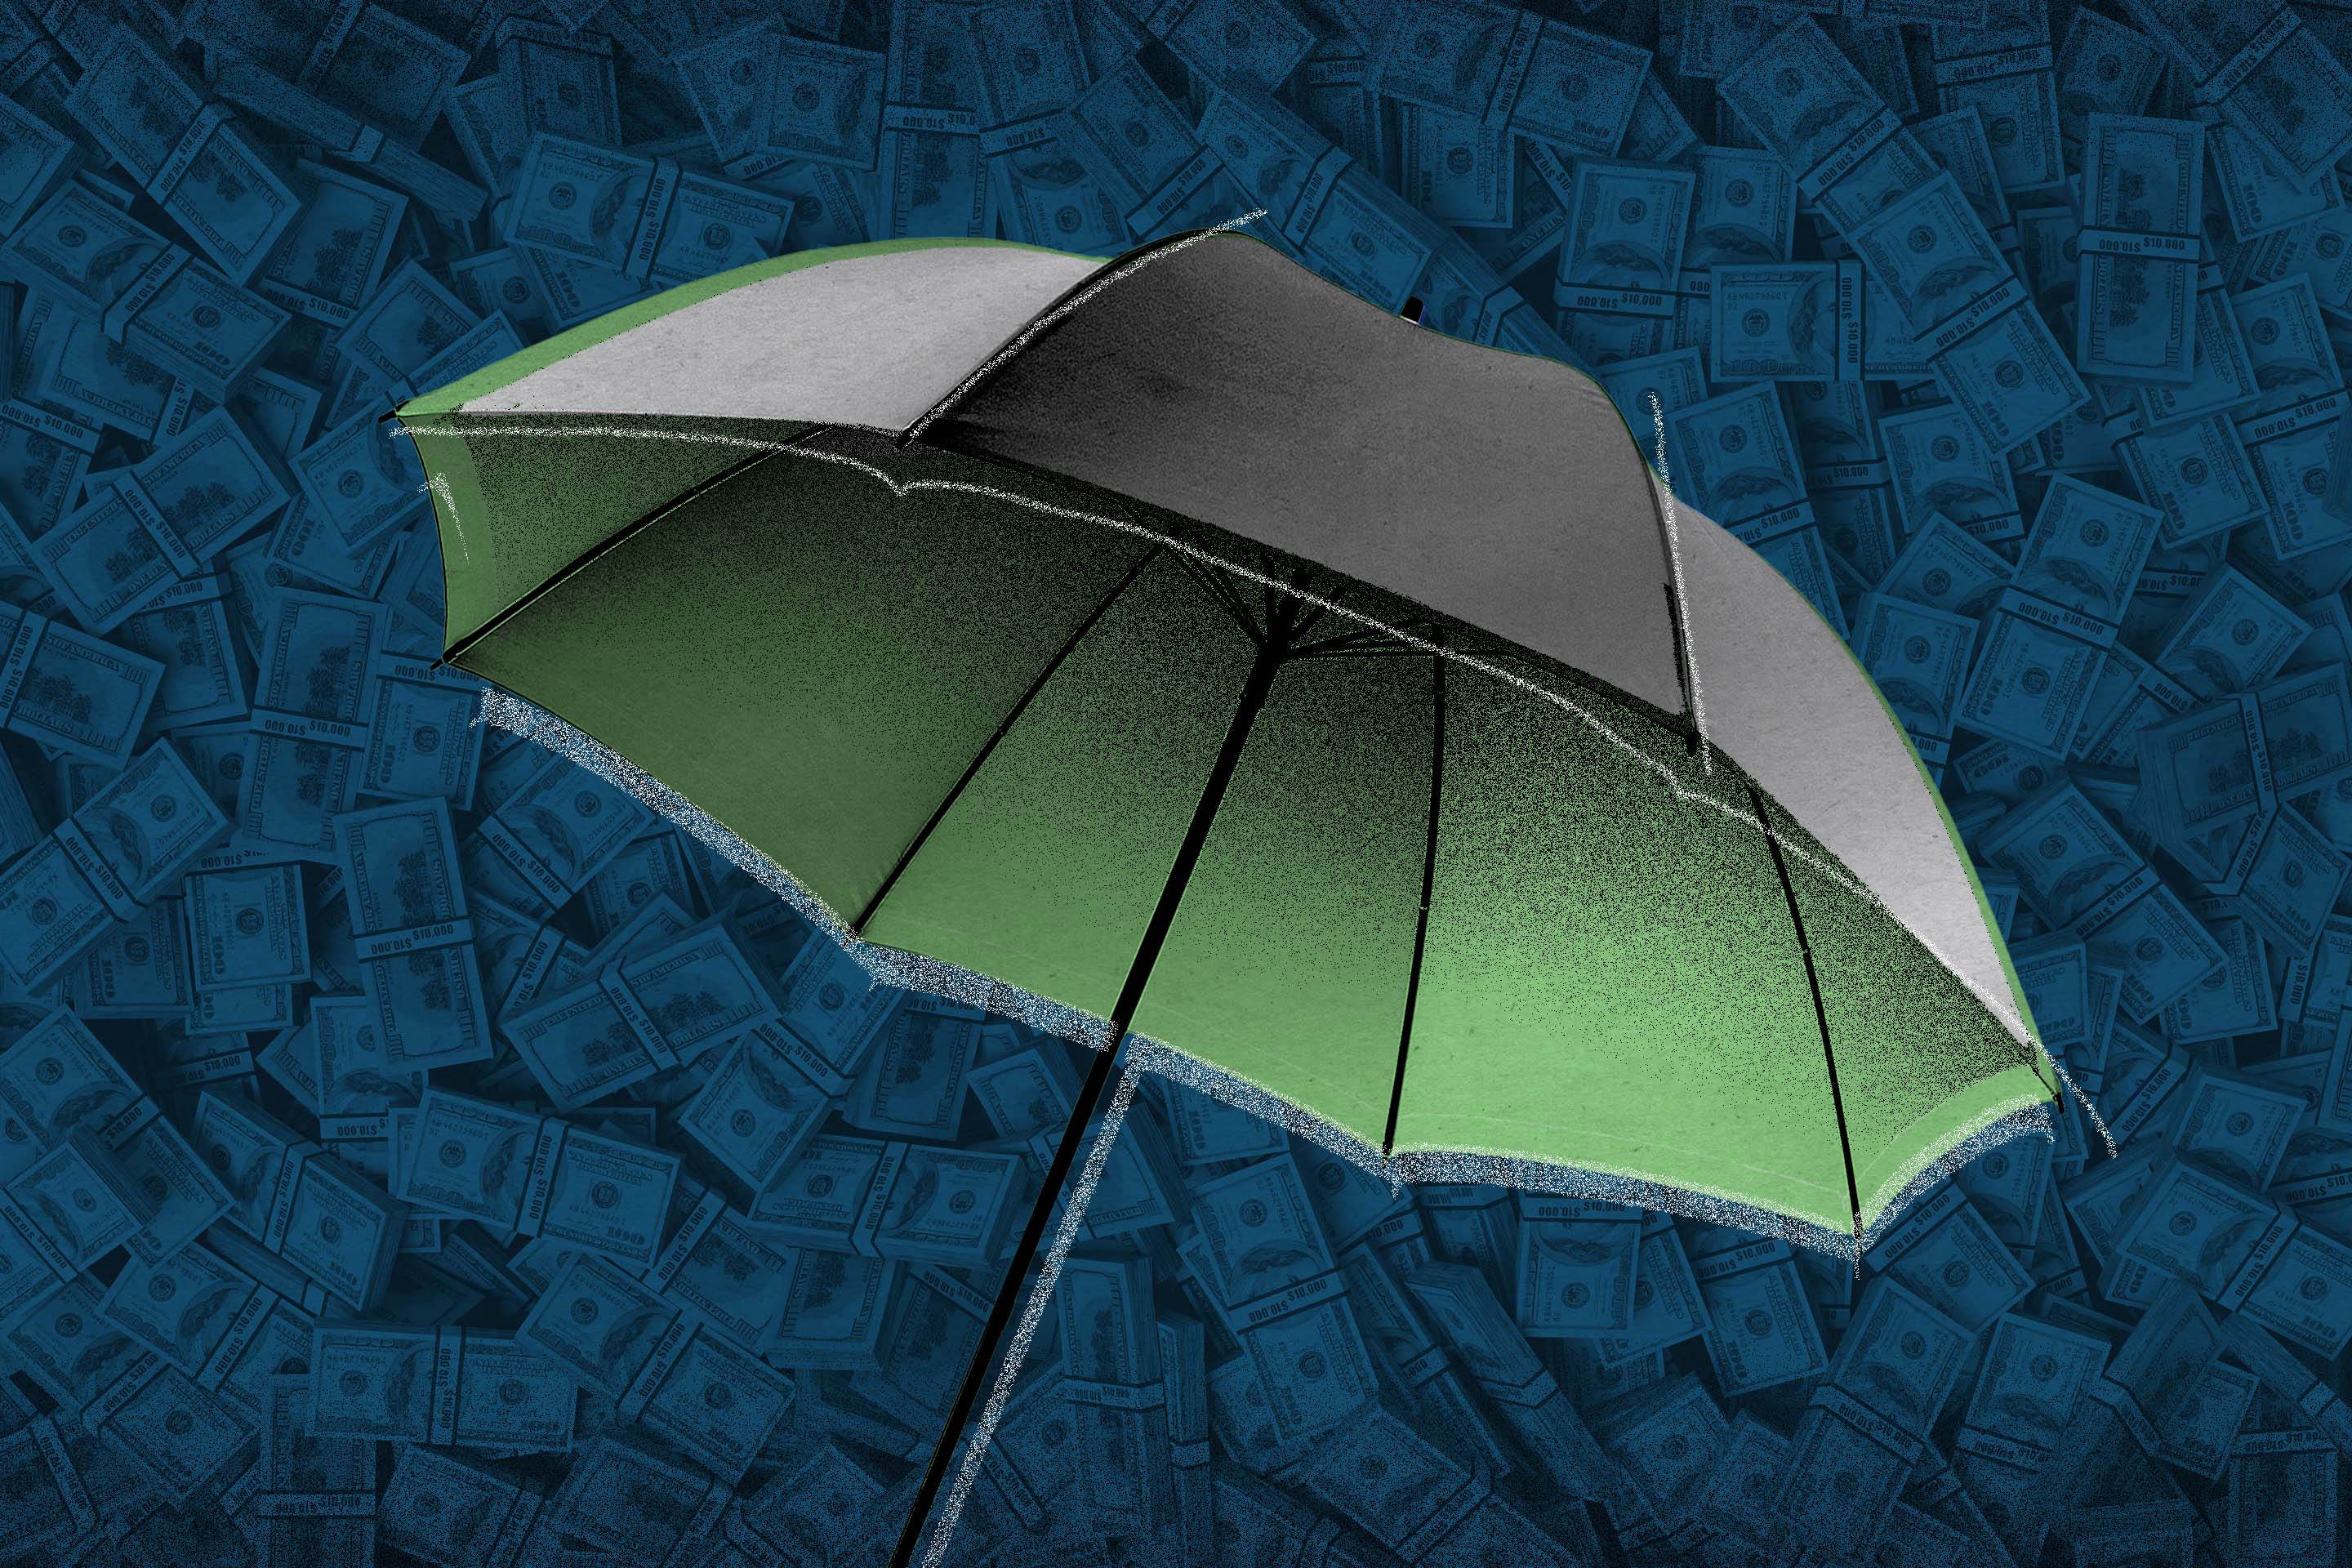 Life Insurance Companies Paid Out a Record $200 Billion Last Year